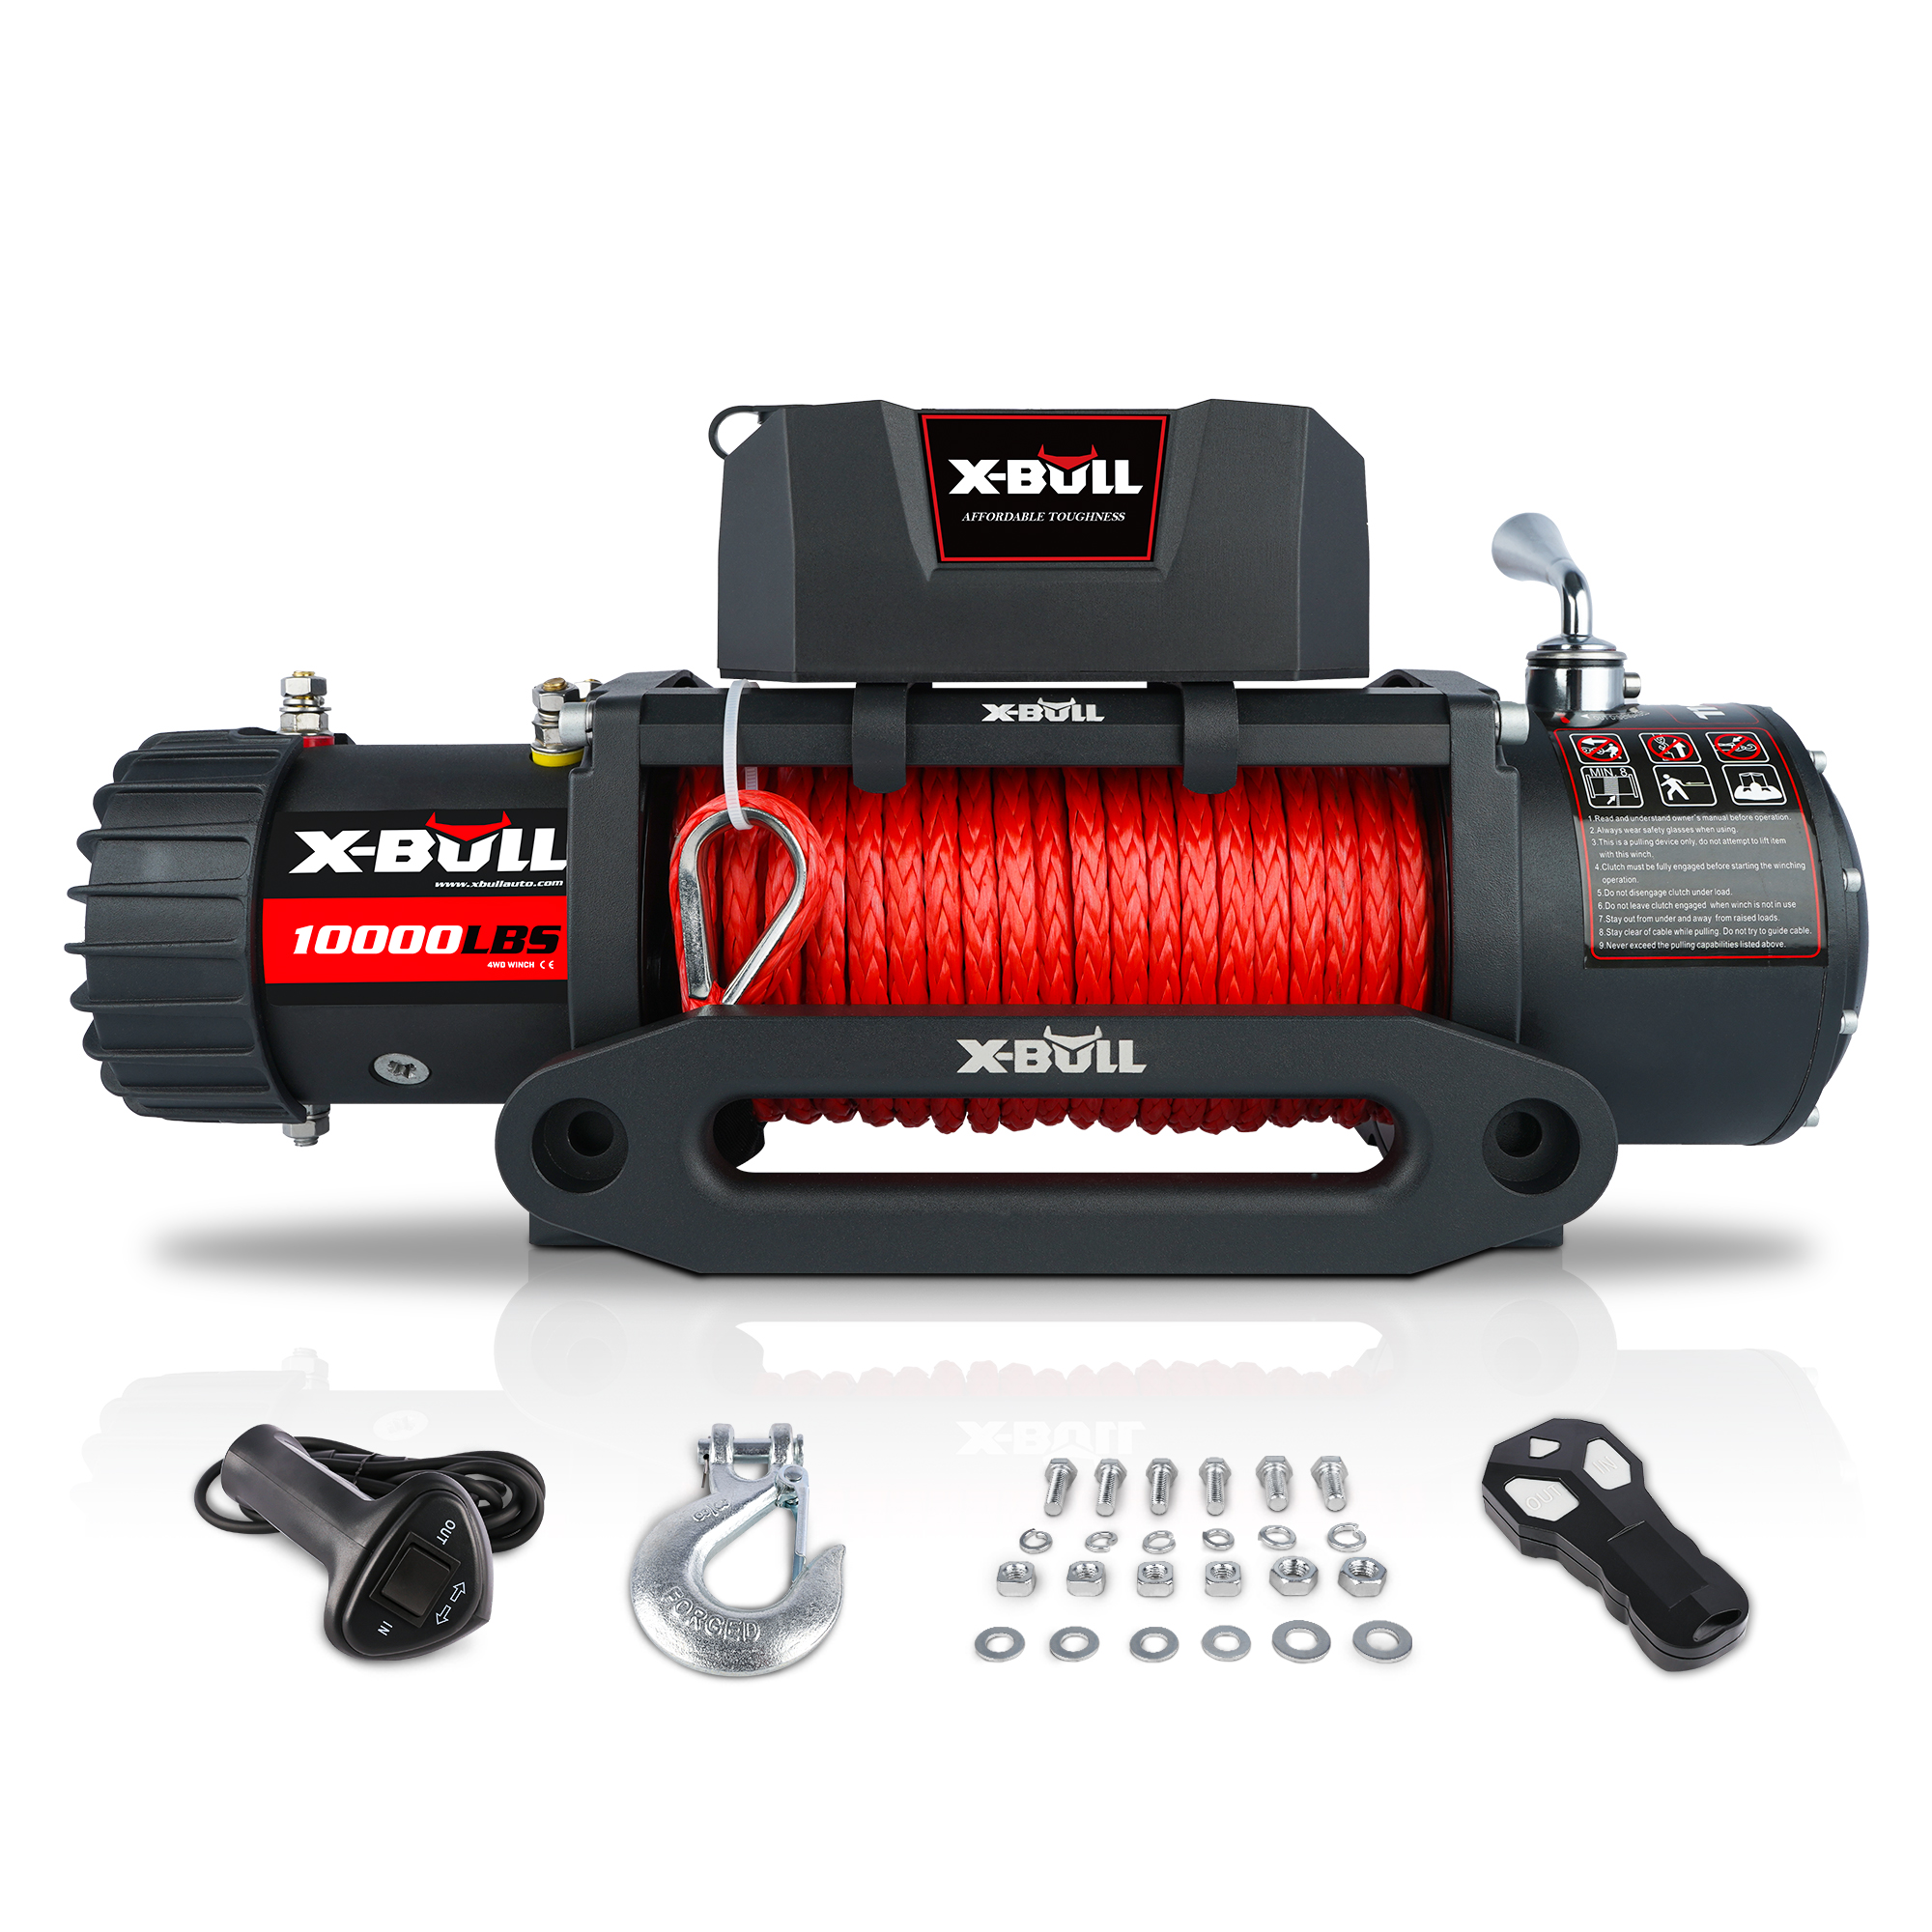 X-BULL 12V Synthetic Rope Winch-10000 lb. Load Capacity Electric Winch Kit,Waterproof IP67 Electric Winch with Hawse Fairlead, with Both Wireless Handheld Remote and Corded Control Recovery-Boyel Living